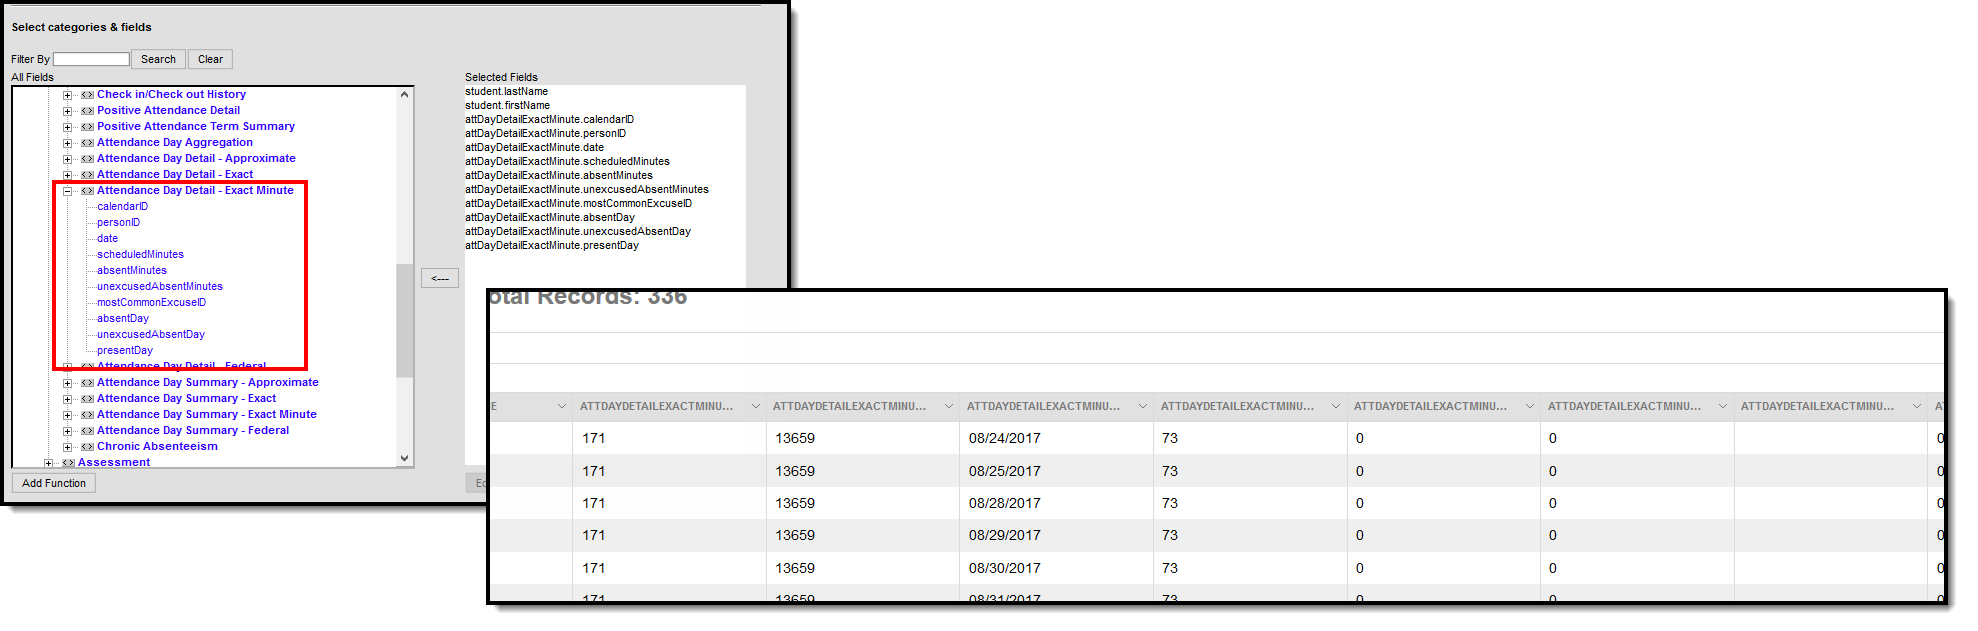 Screenshot of Attendance Day Summary View in the Query Wizard.